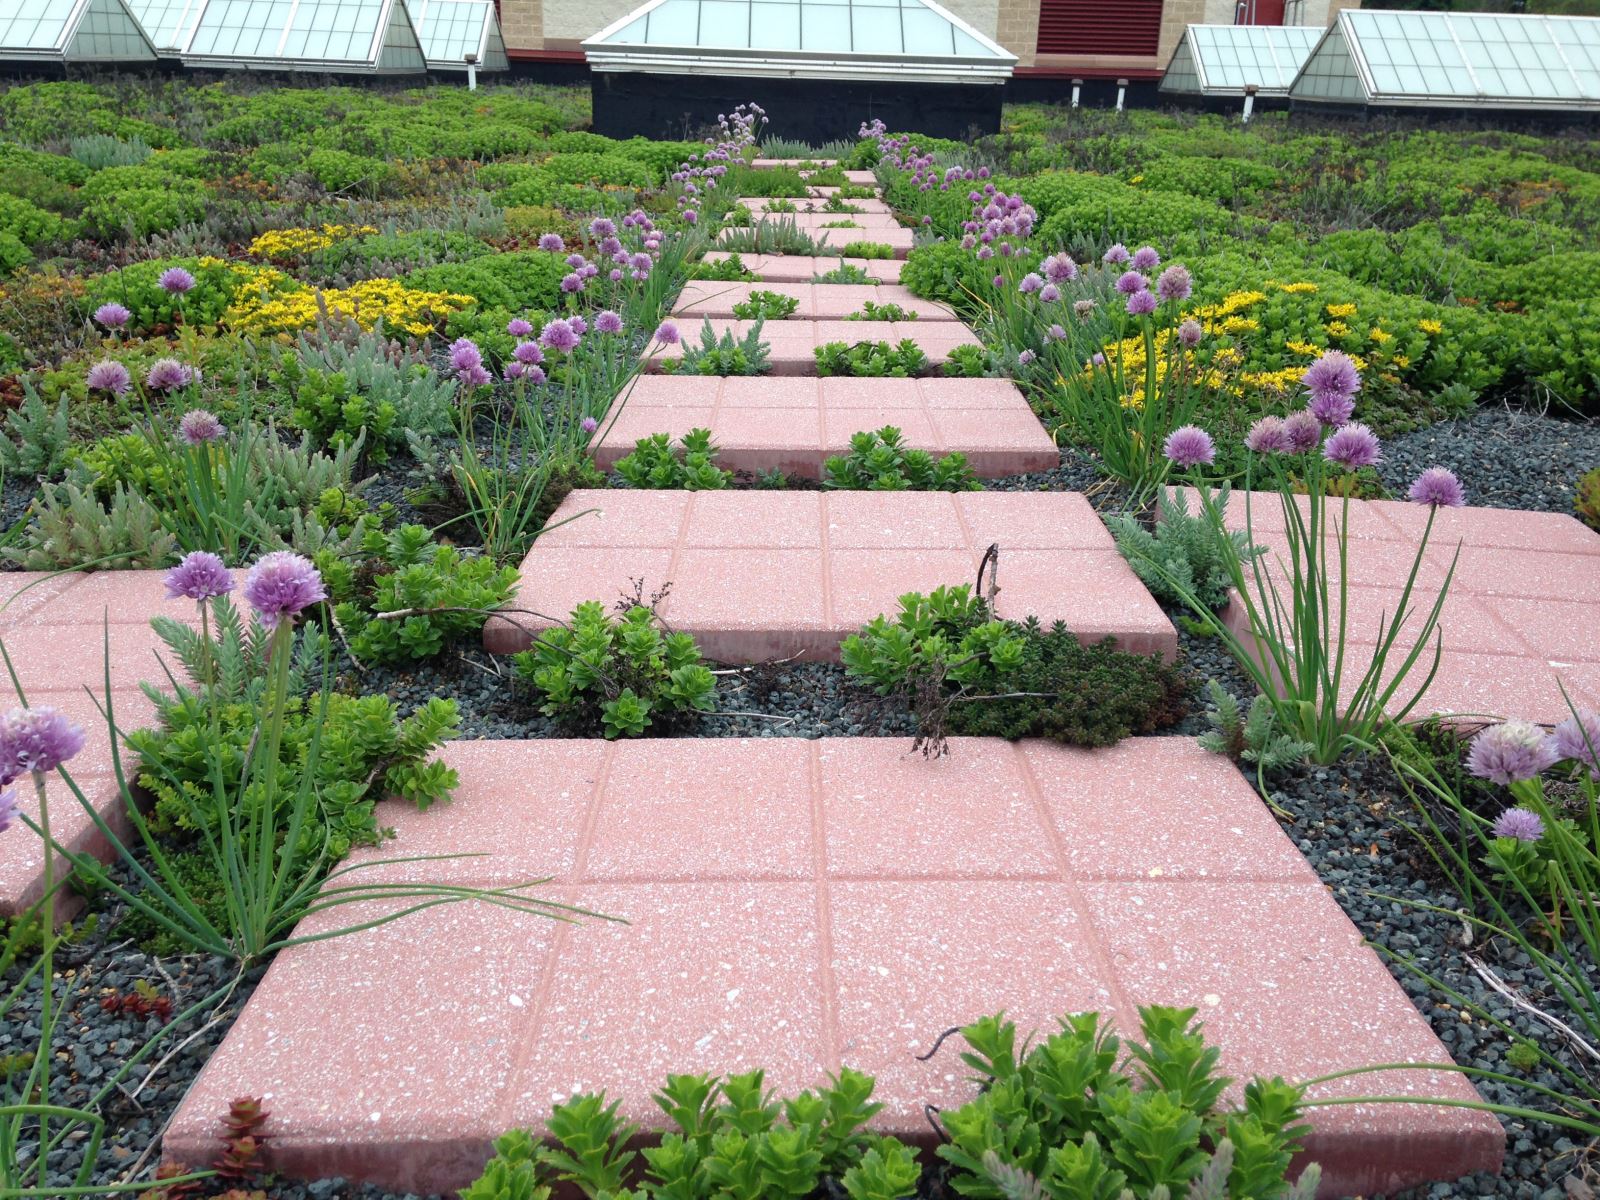 Green roof and flowers